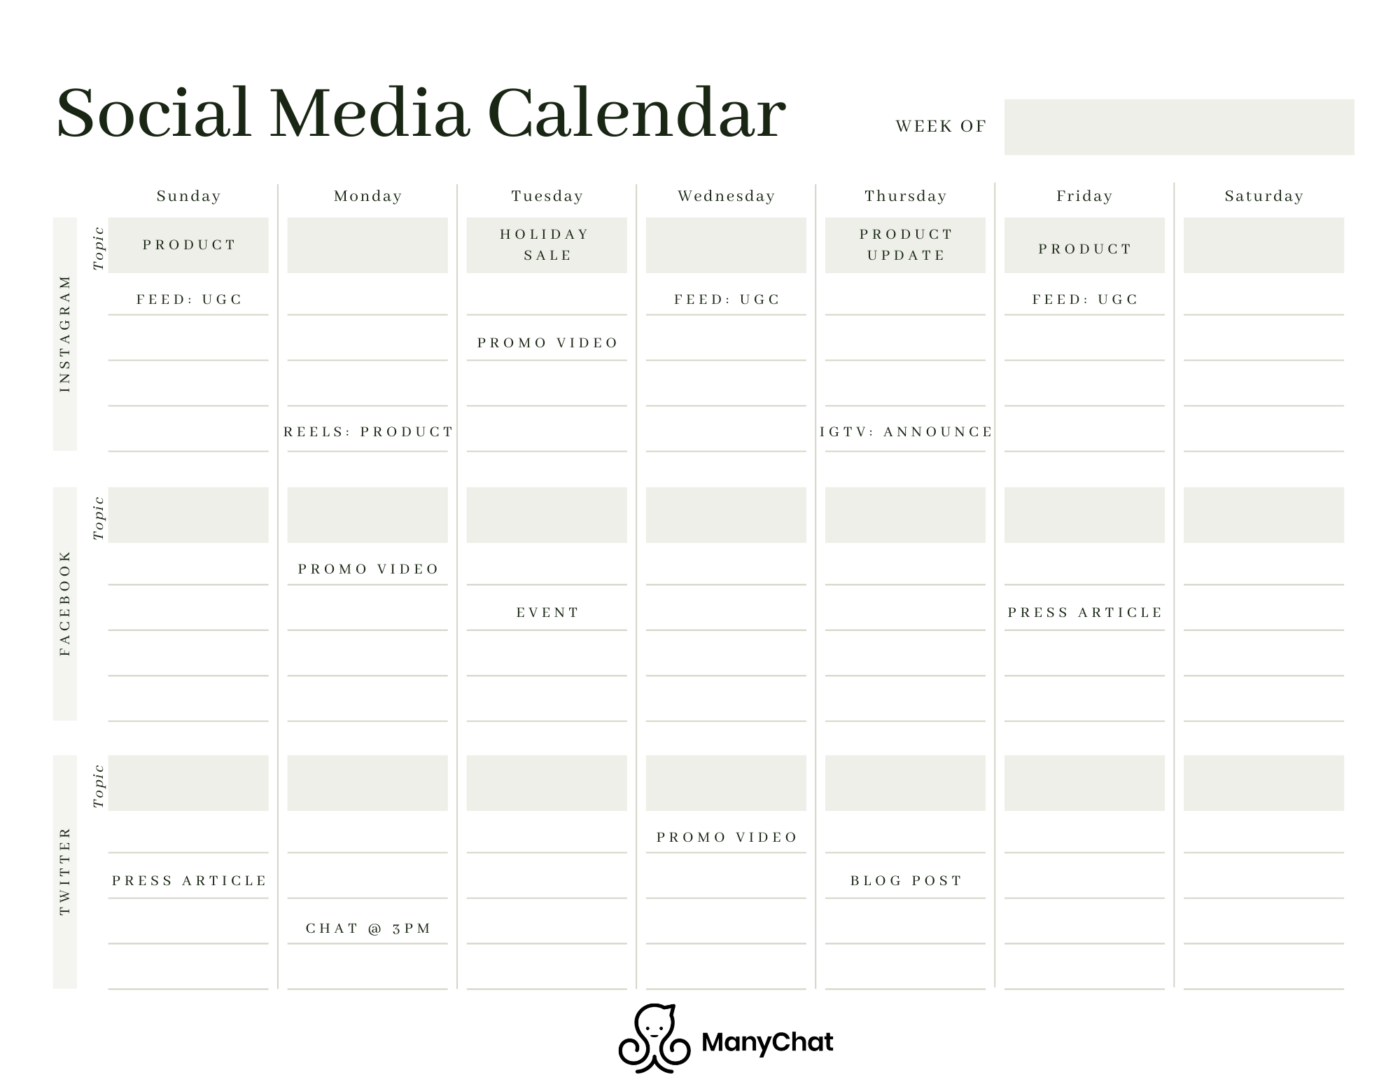 Real Examples of Instagram Content Calendars - Manychat Blog